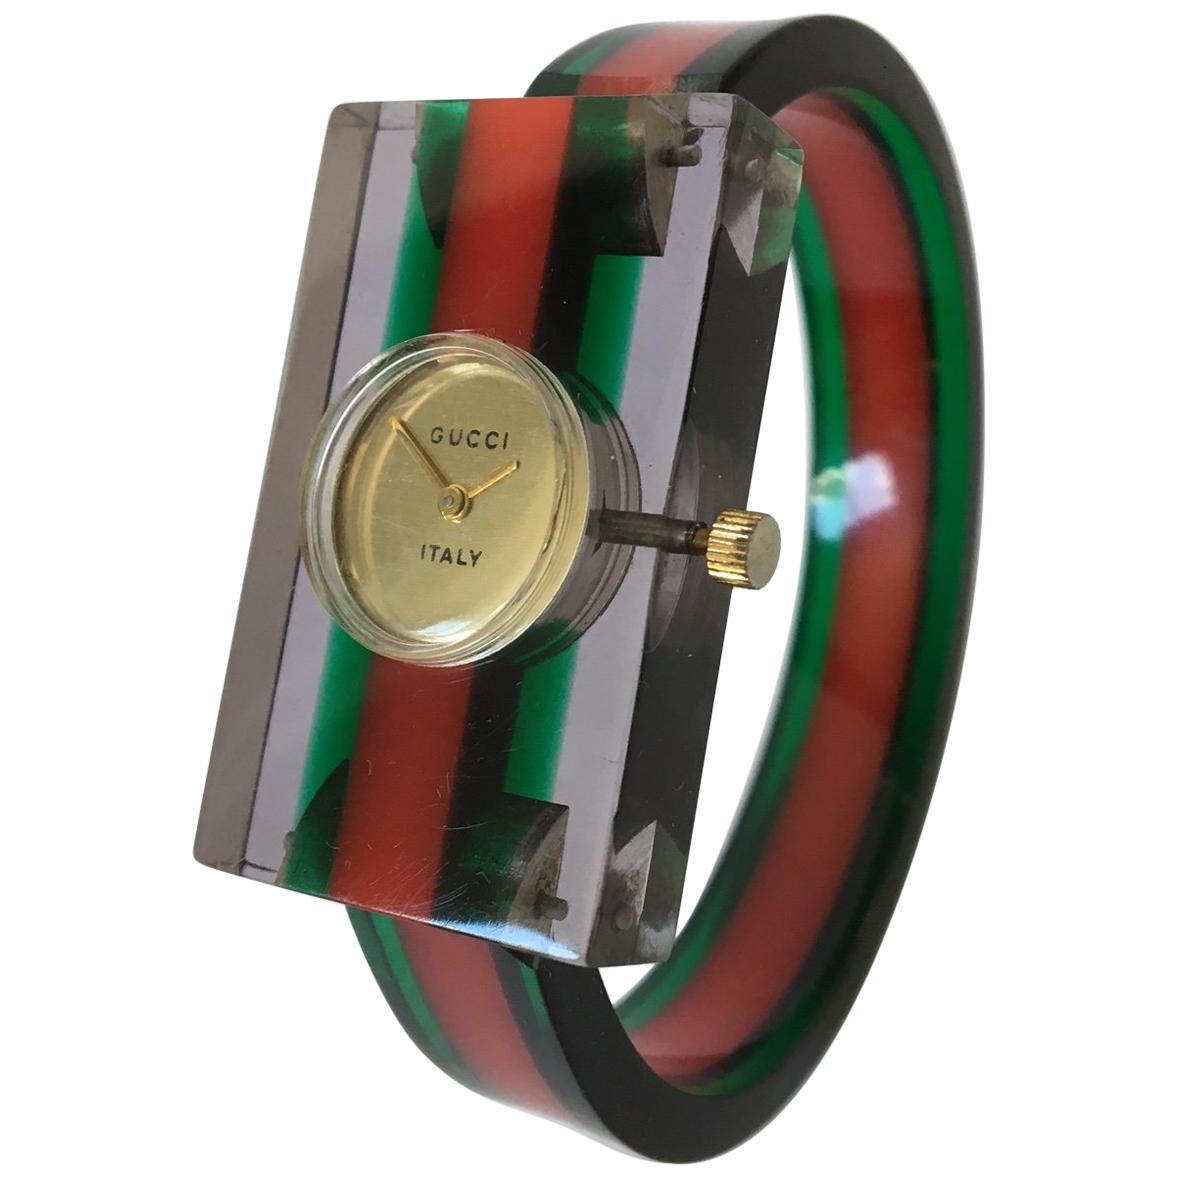 Vintage 1970s Gucci Lucite and Bakelite Bangle Watch